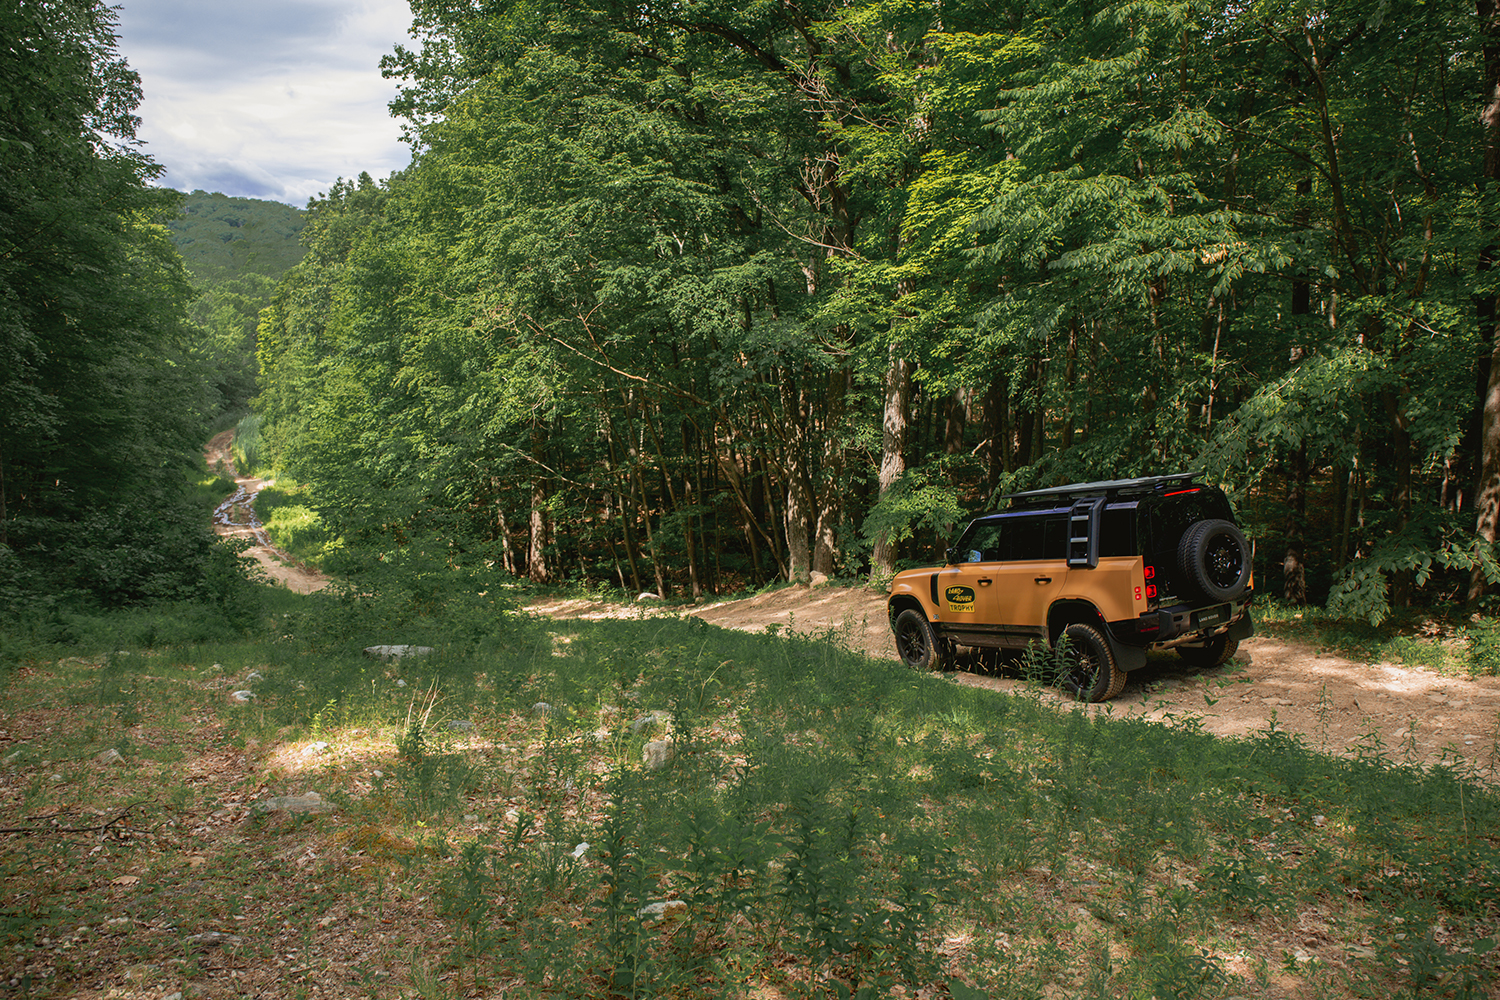 A Land Rover Defender Trophy Edition facing down an off-road trail, like one at the company's Biltmore Driving Center